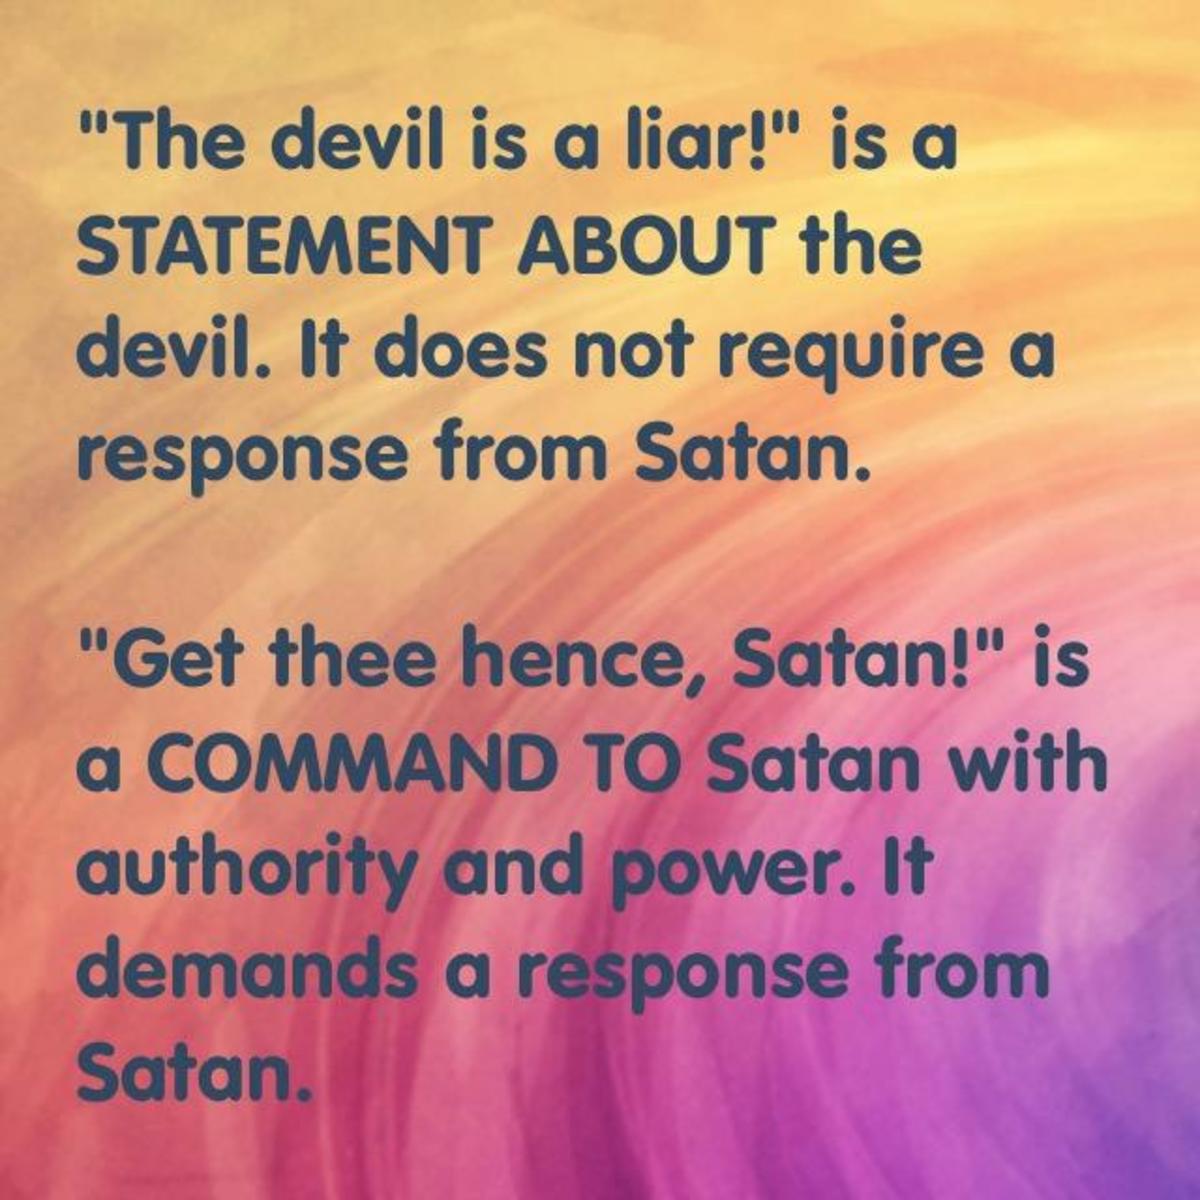 the-devil-is-a-liar-vs-get-thee-hence-satan